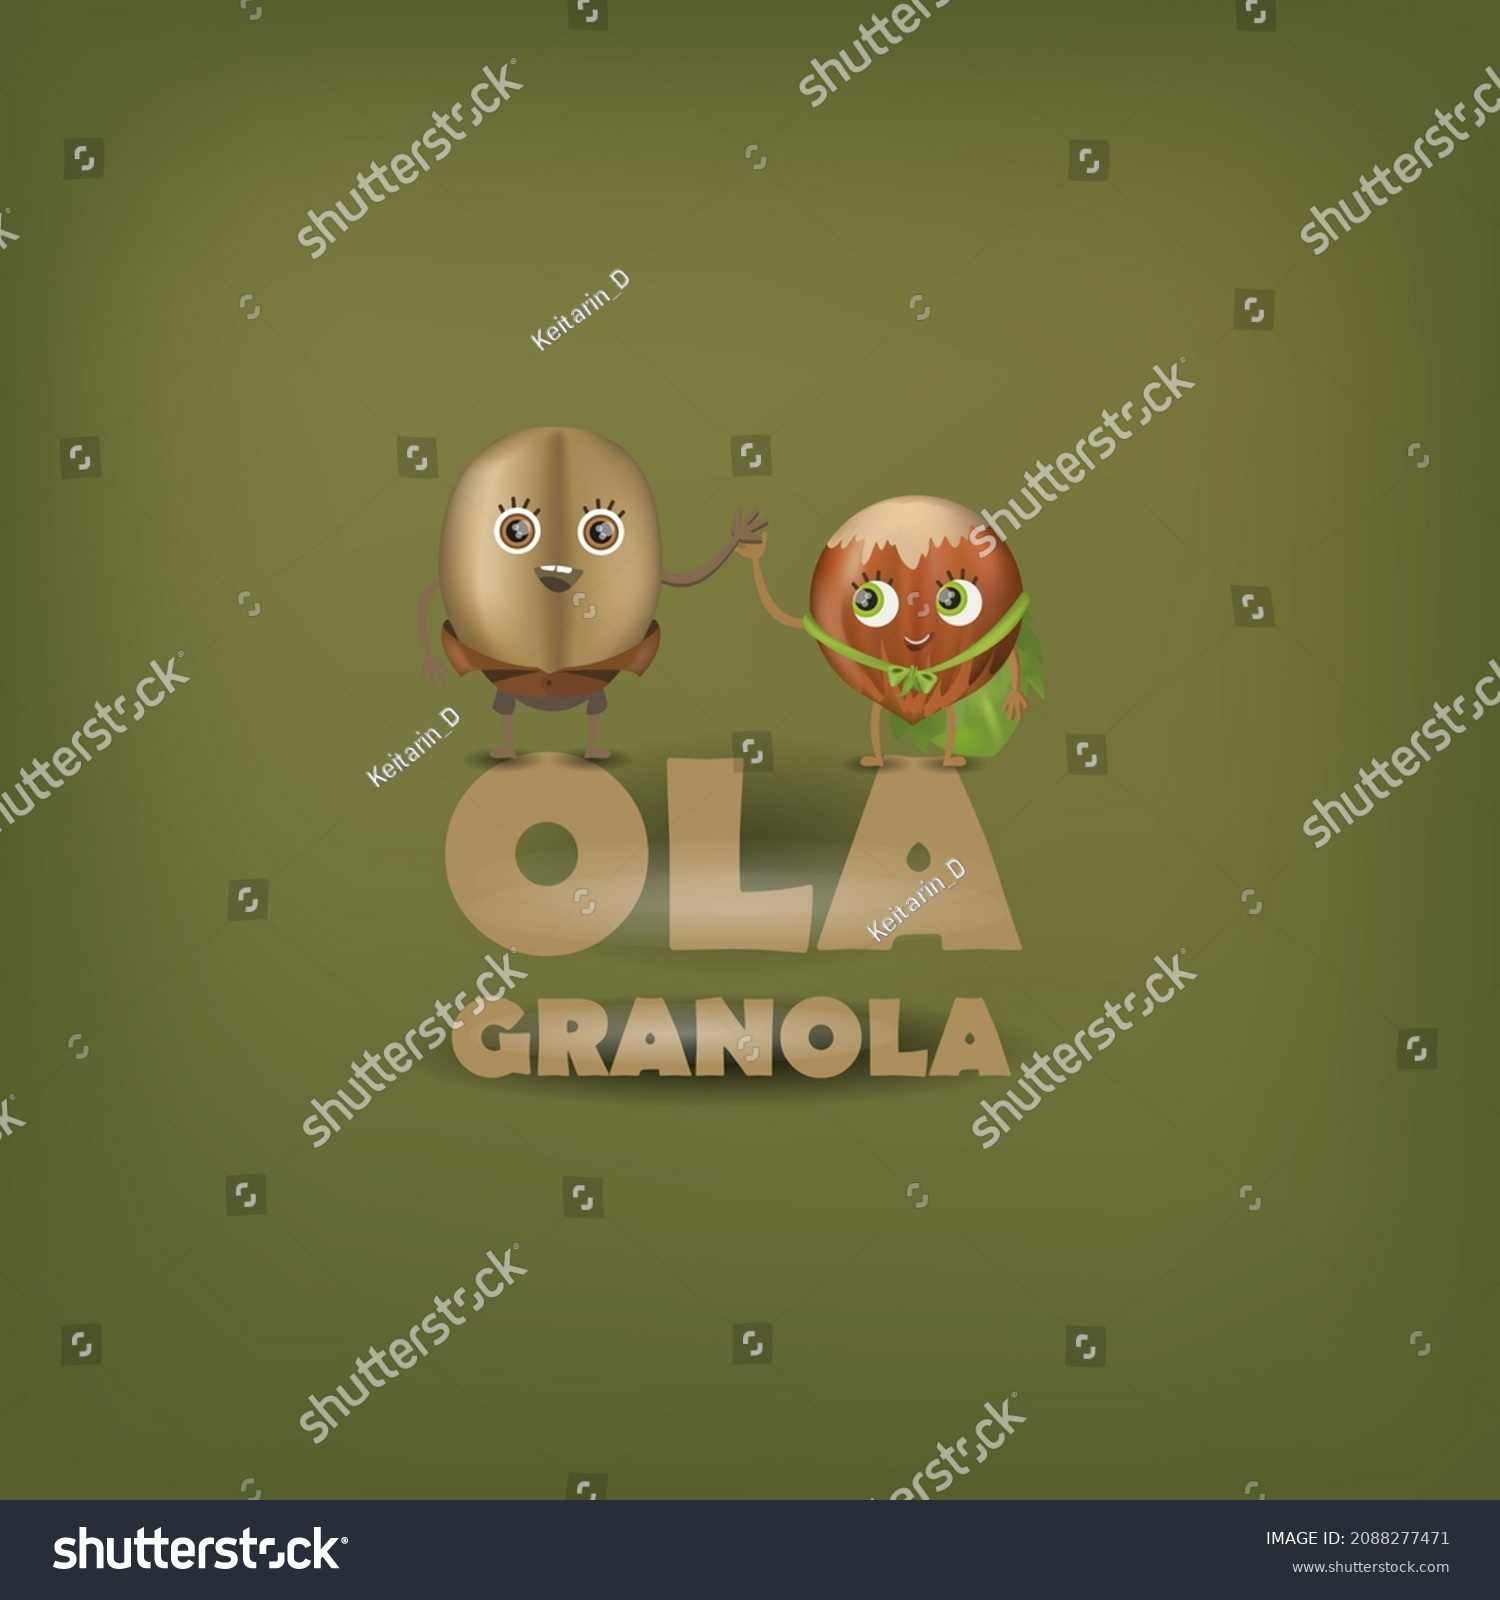 SVG of Characters for the brand. A grain of oatmeal and a nut dear friend. Cute characters in brown colors for packaging. The face of the brand. svg